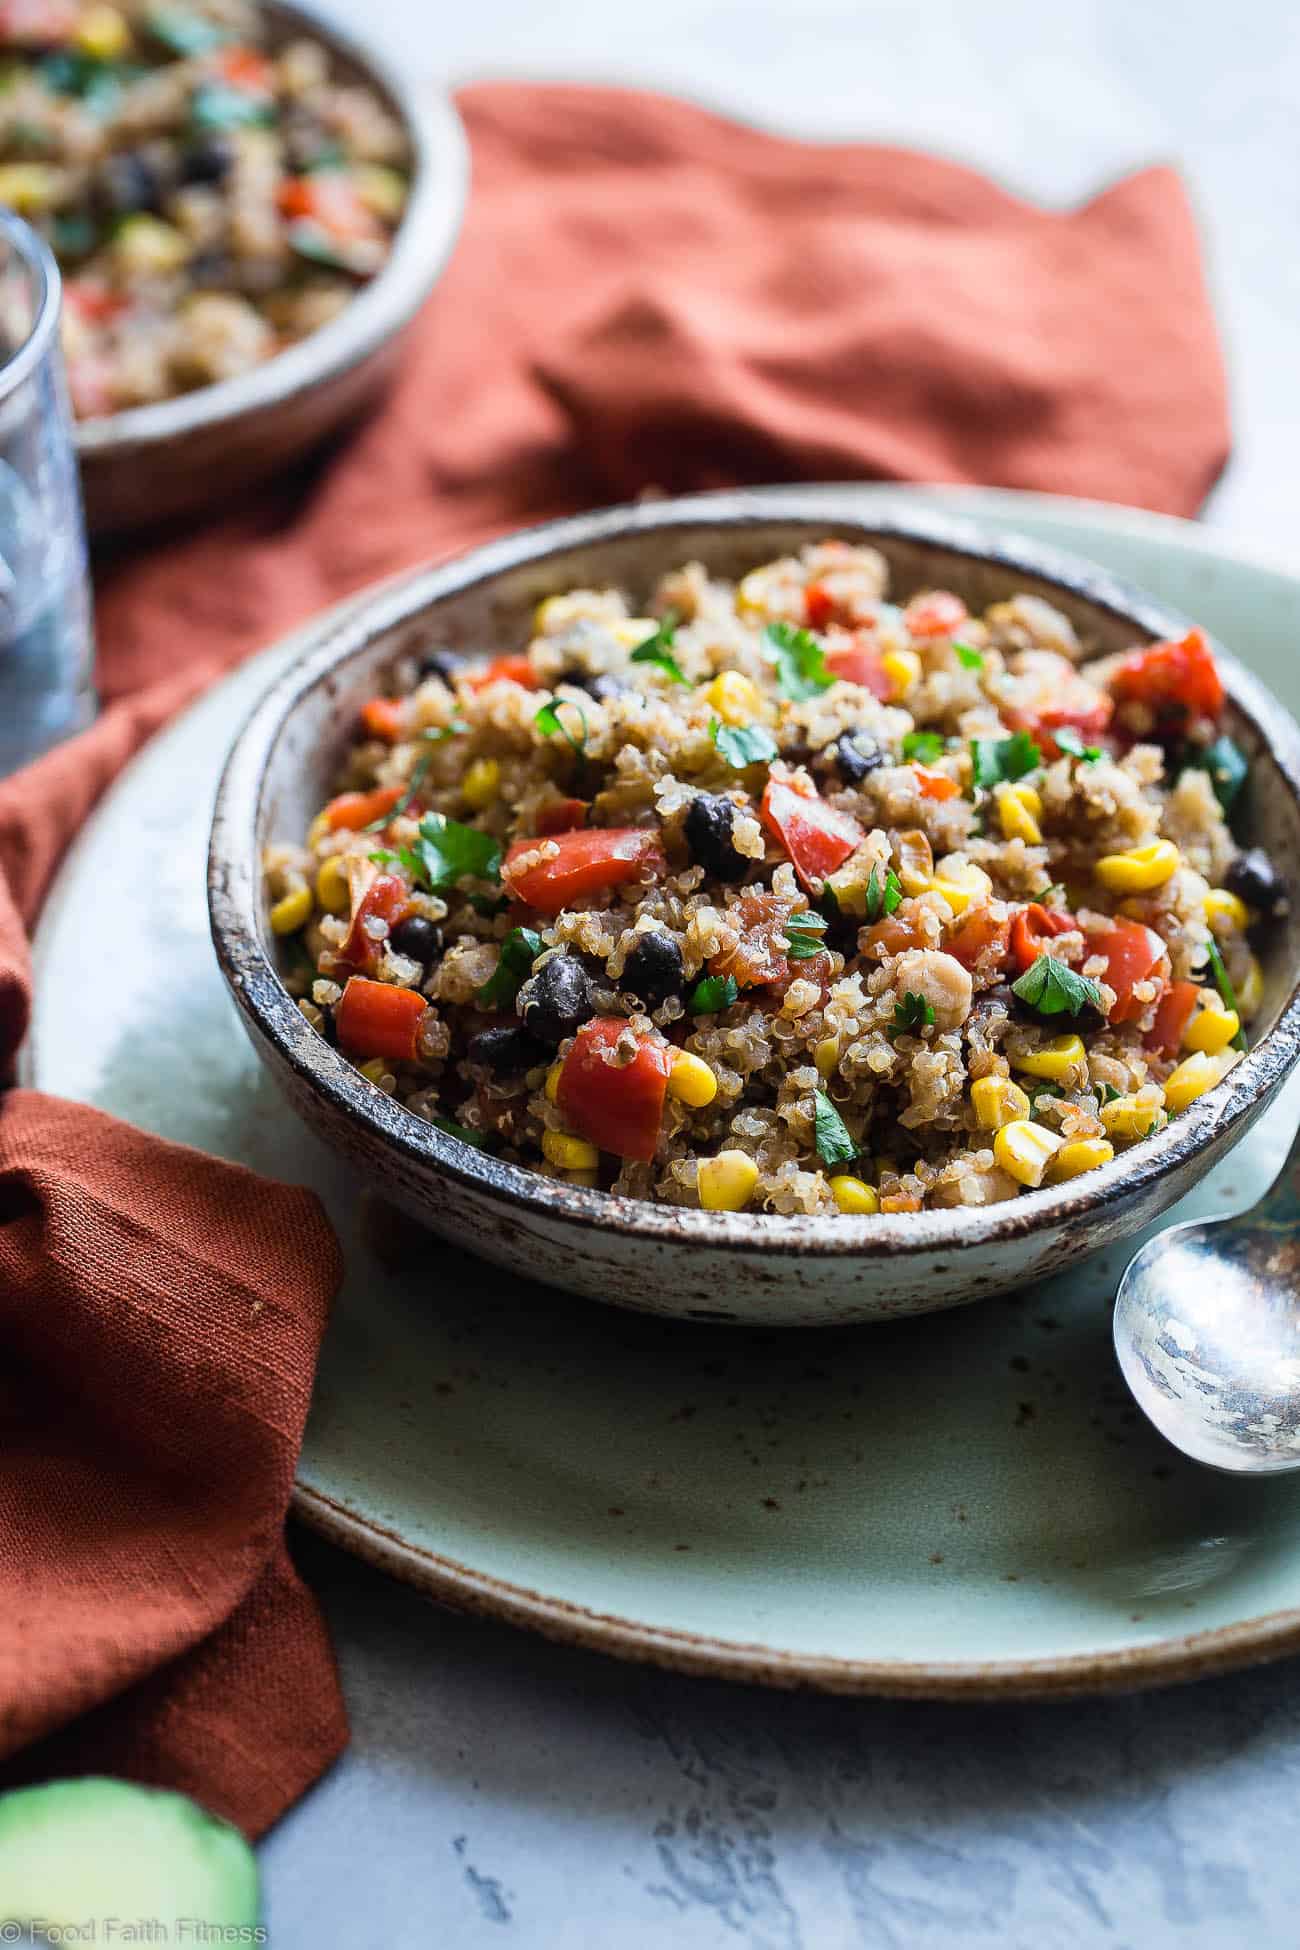 One Pan Mexican Quinoa Casserole - Let the slow cooker do the work for you with this family friendly, healthy weeknight dinner!  Gluten free with a vegan option and even picky eaters love it! | #FoodFaithFitness | #Quinoa #Glutenfree #Healthy #Vegan #Vegetarian